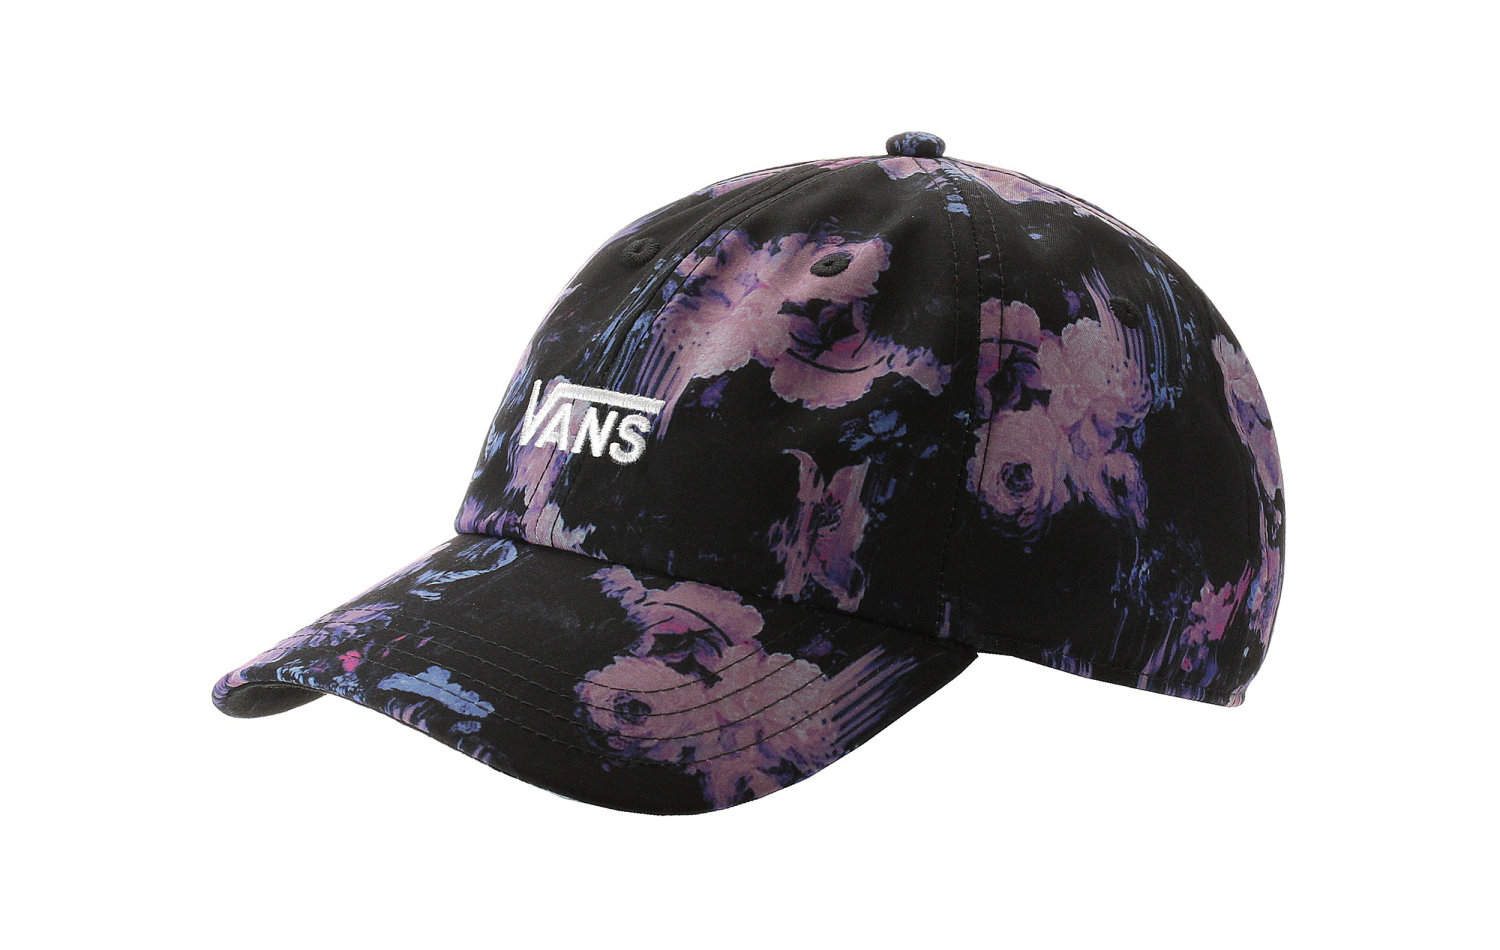 Vans Court Side Printed Hat (VN0A34GRZUC)